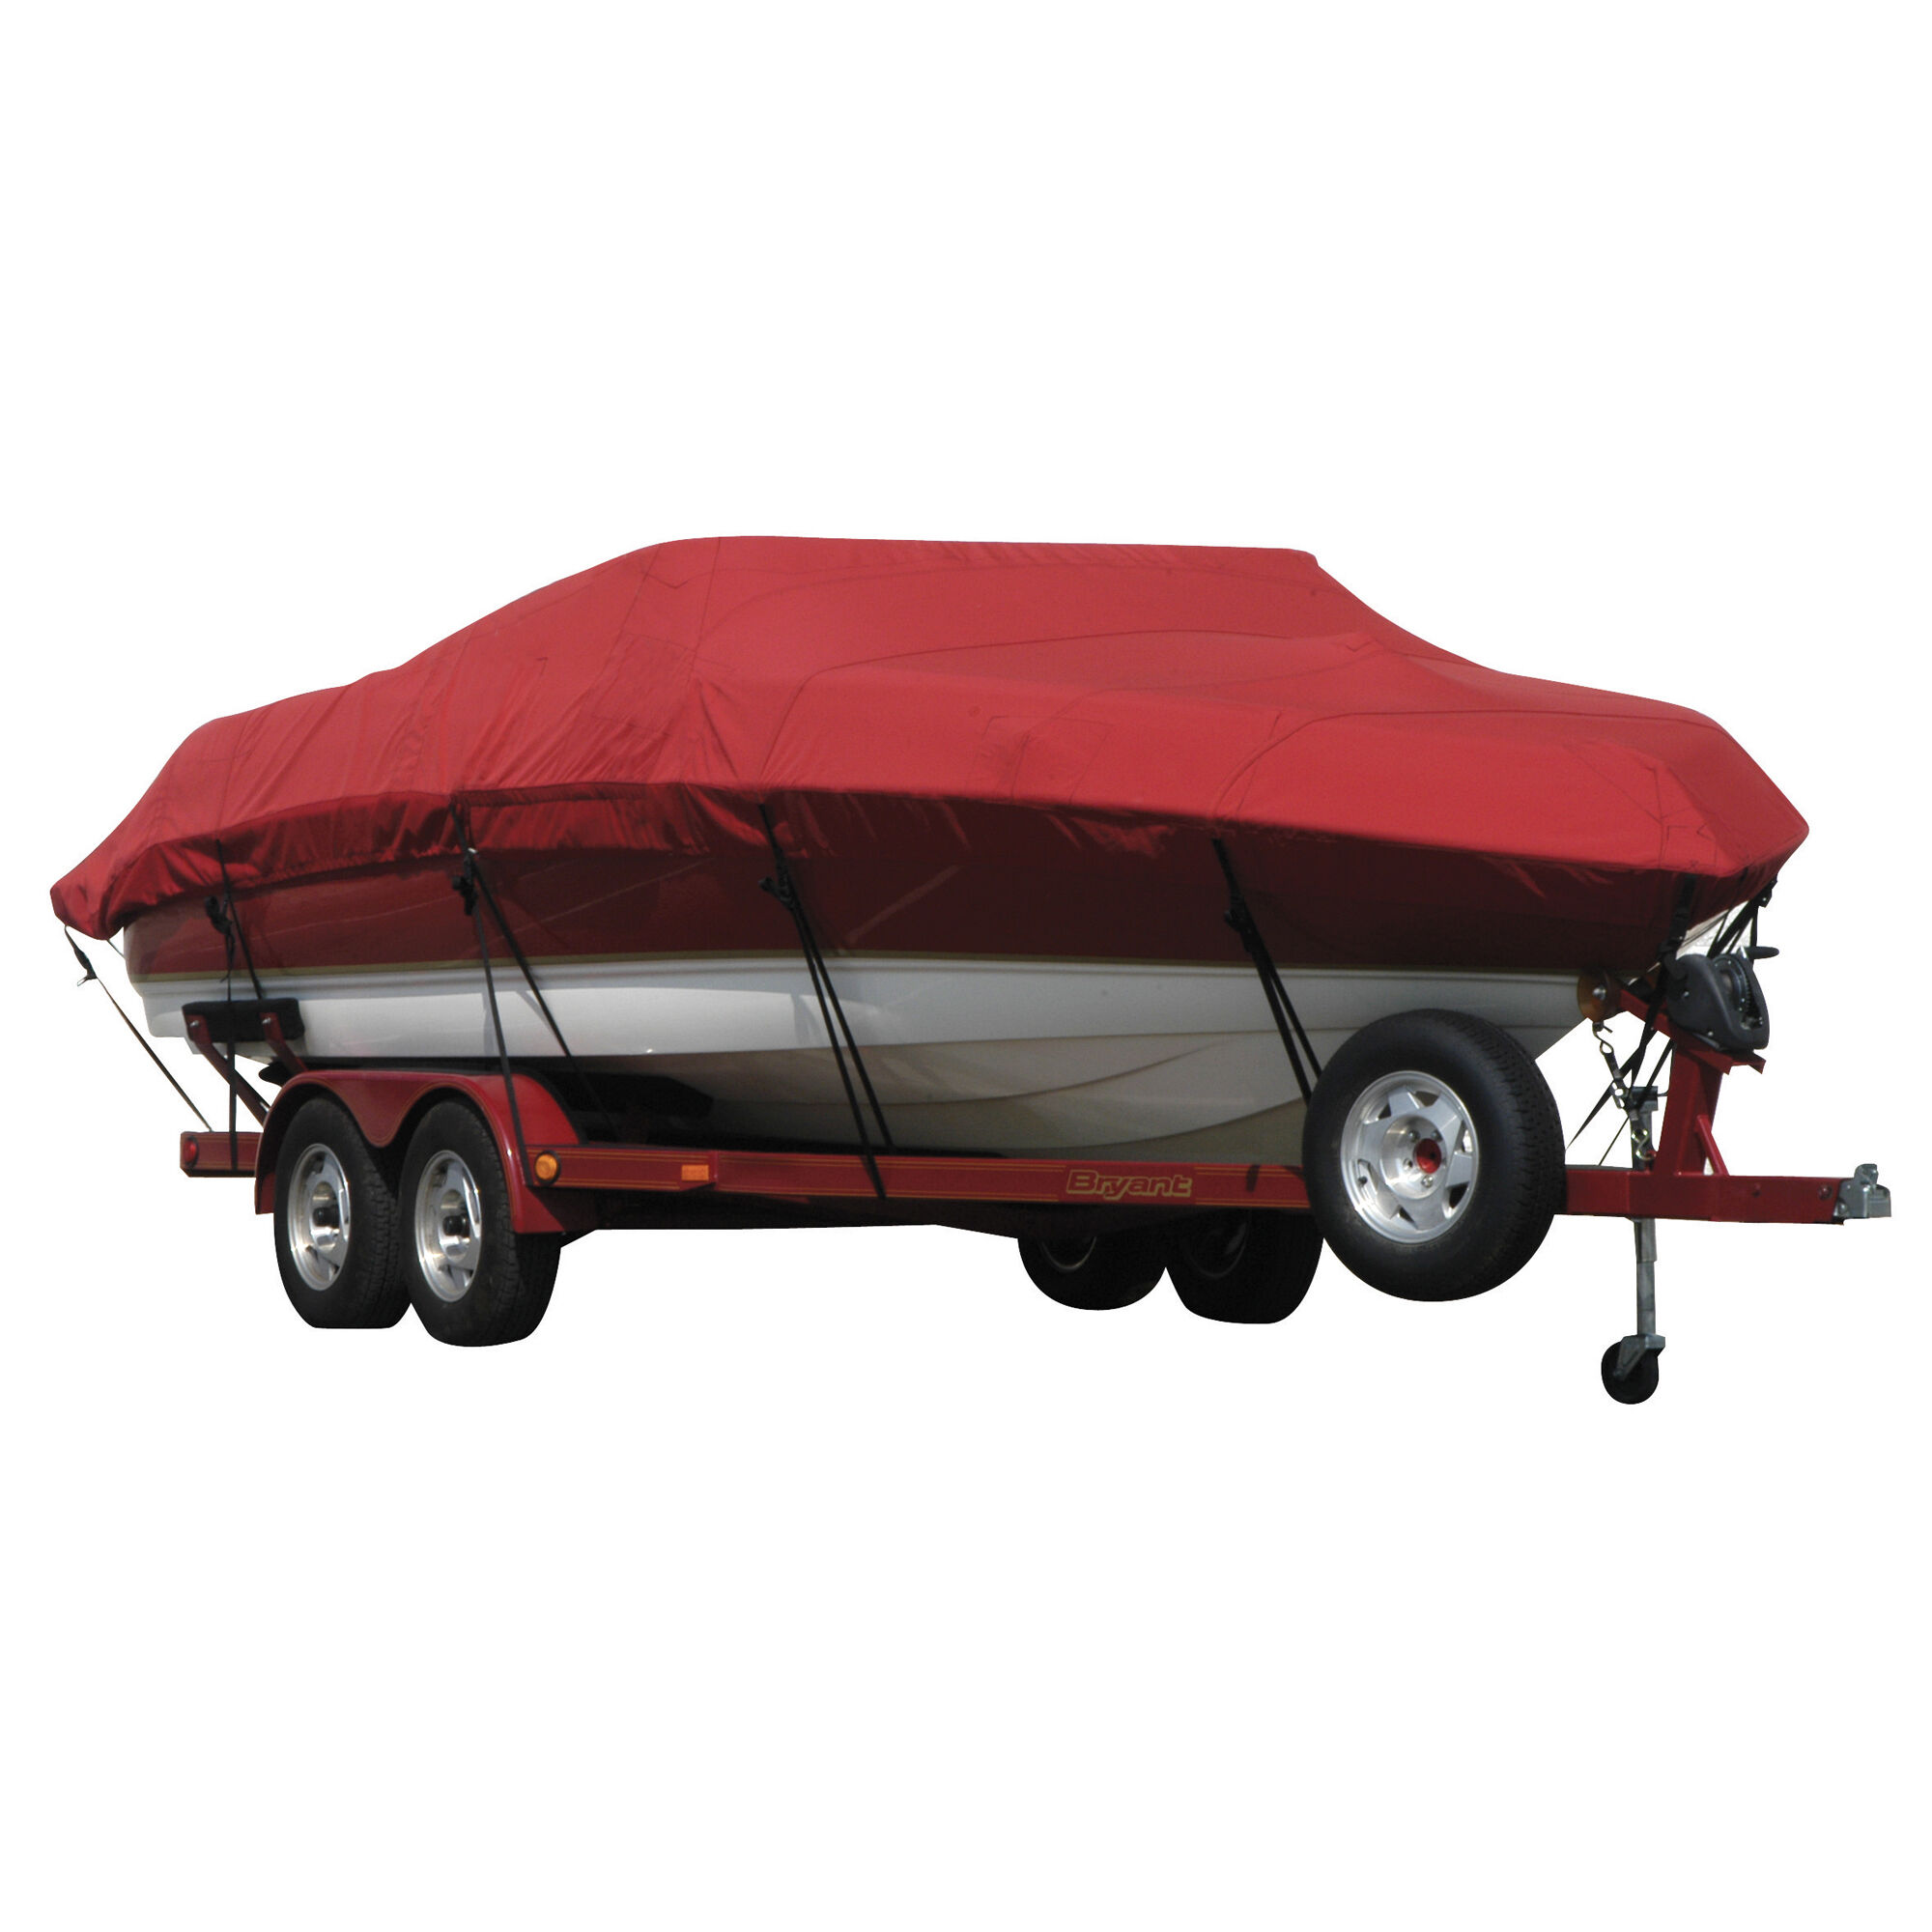 Covermate Hurricane Sunbrella Exact-Fit Nitro Boat Cover Fits 1999-2005 Nitro NX 882 SC Outboard w/ Port Trolling Motor in Red